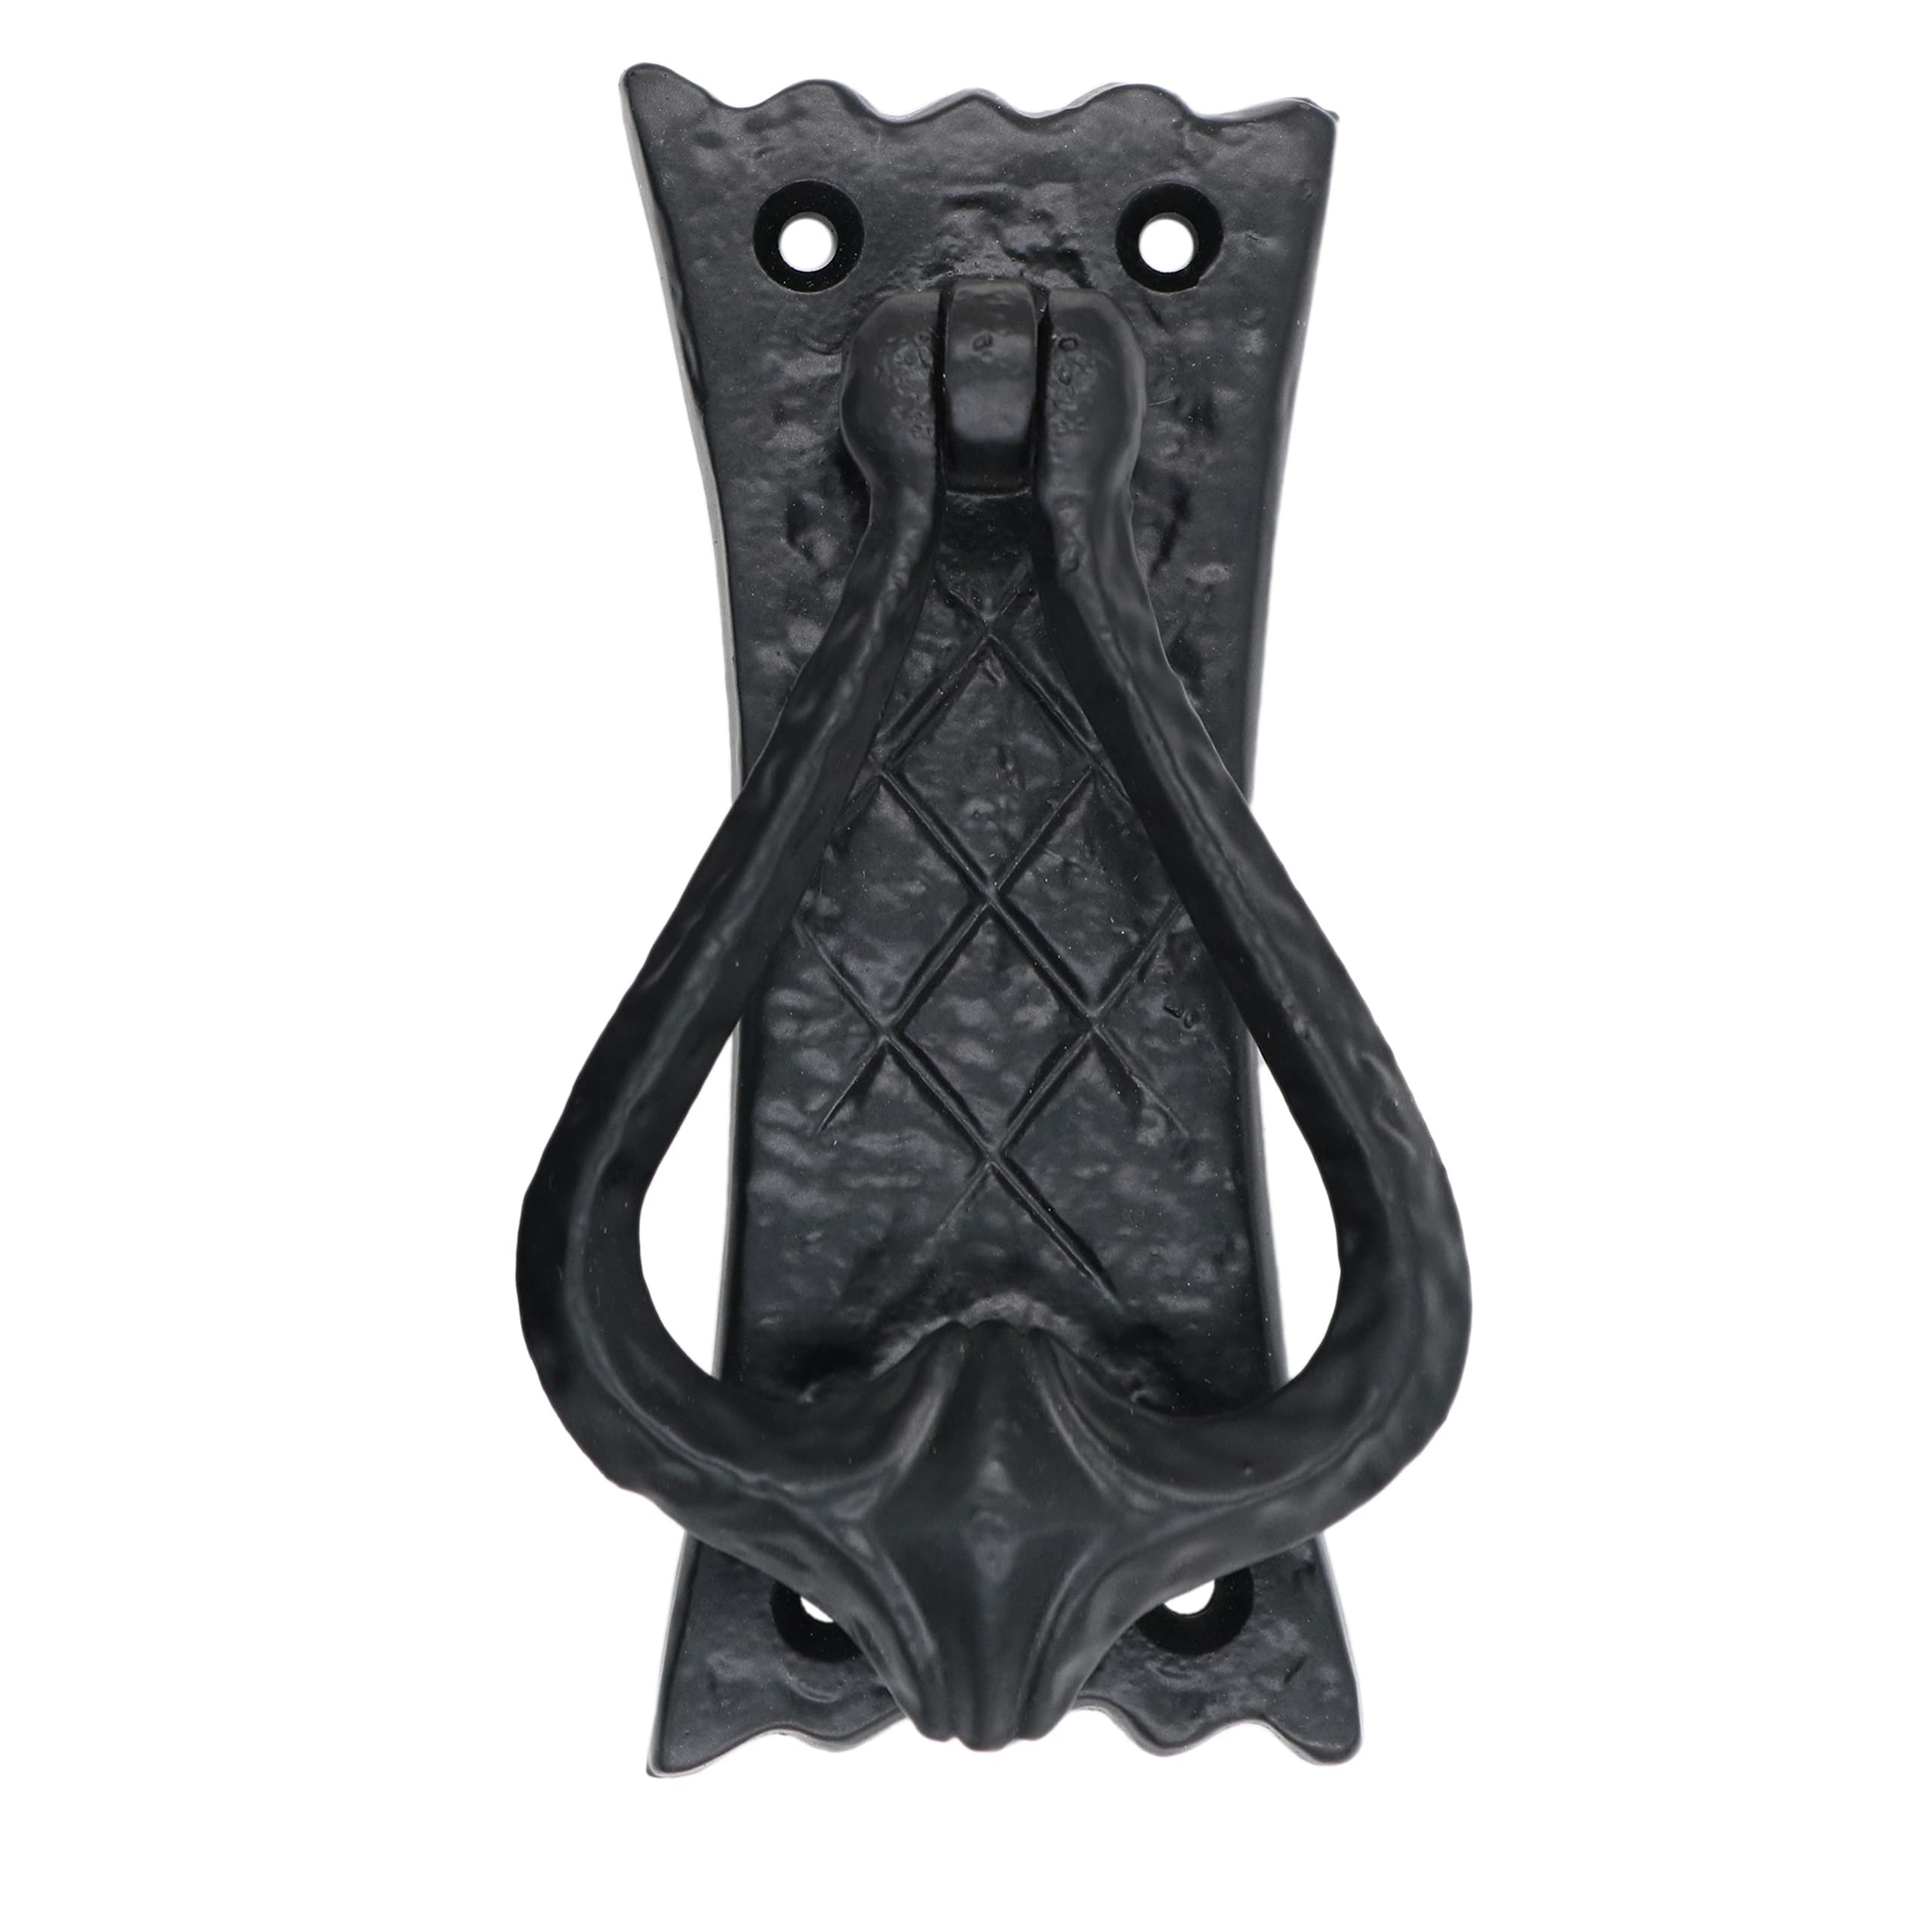 Cast Iron Rustic Hook: A Vintage Touch for Your Space